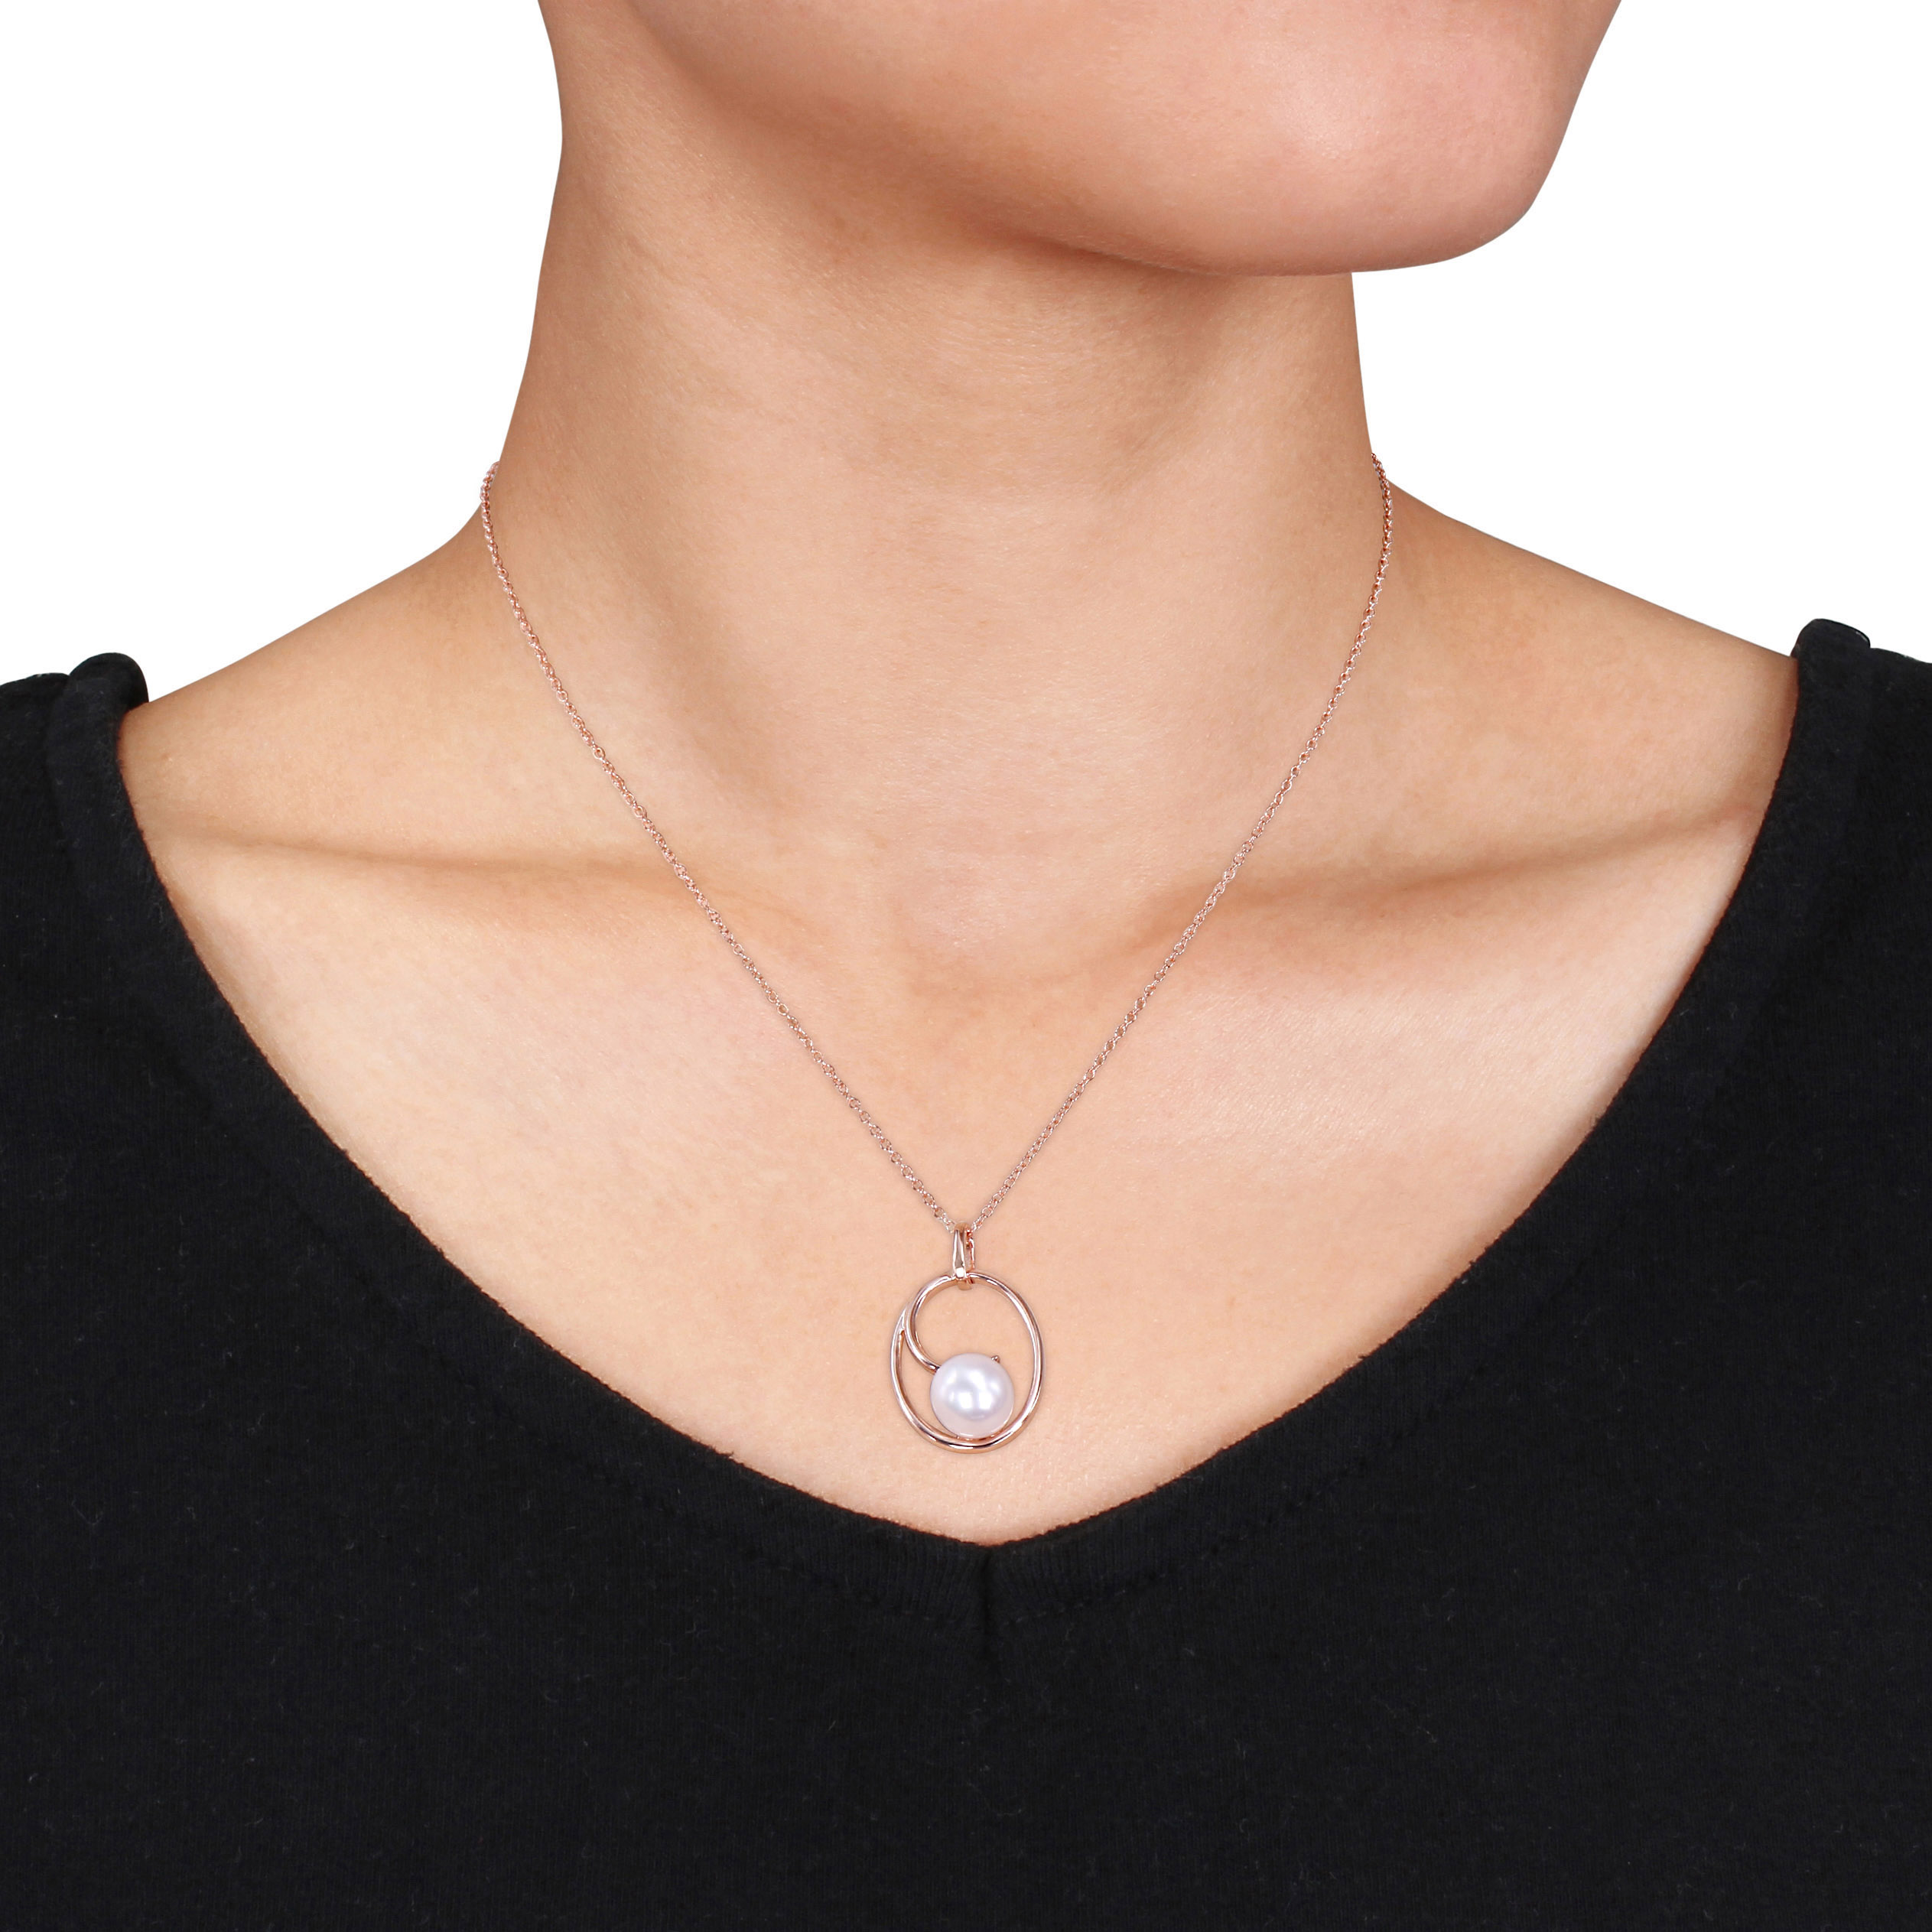 9-9.5 MM Cultured Freshwater Pearl Oval Drop Pendant With Chain in Rose Plated Sterling Silver - 18 in.